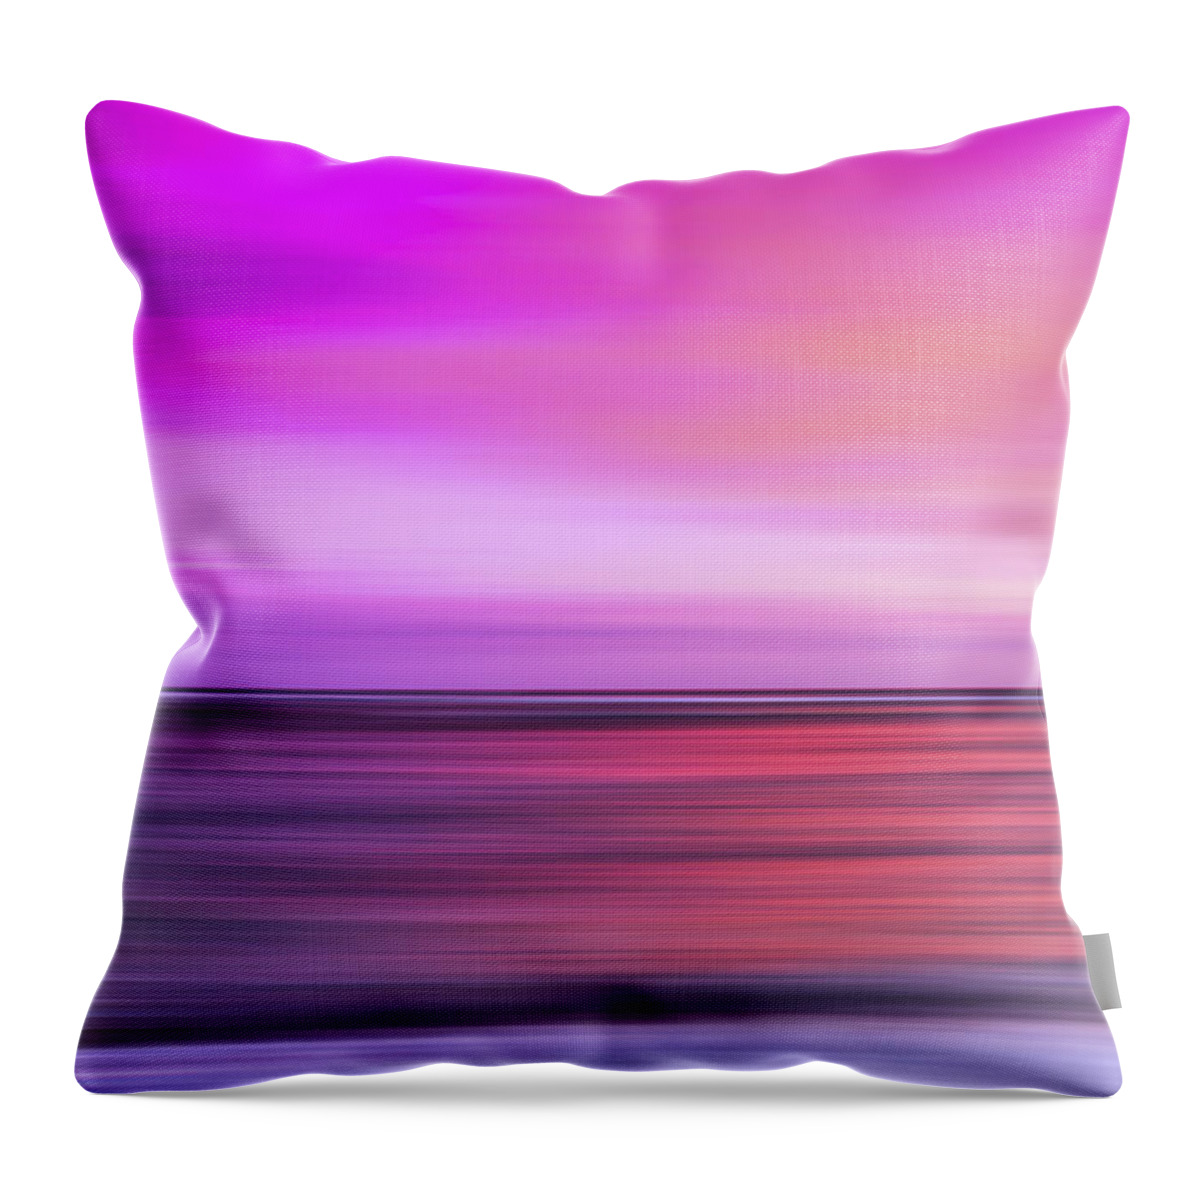 Pink Throw Pillow featuring the photograph Pink Waikiki - 1 of 3 by Sean Davey